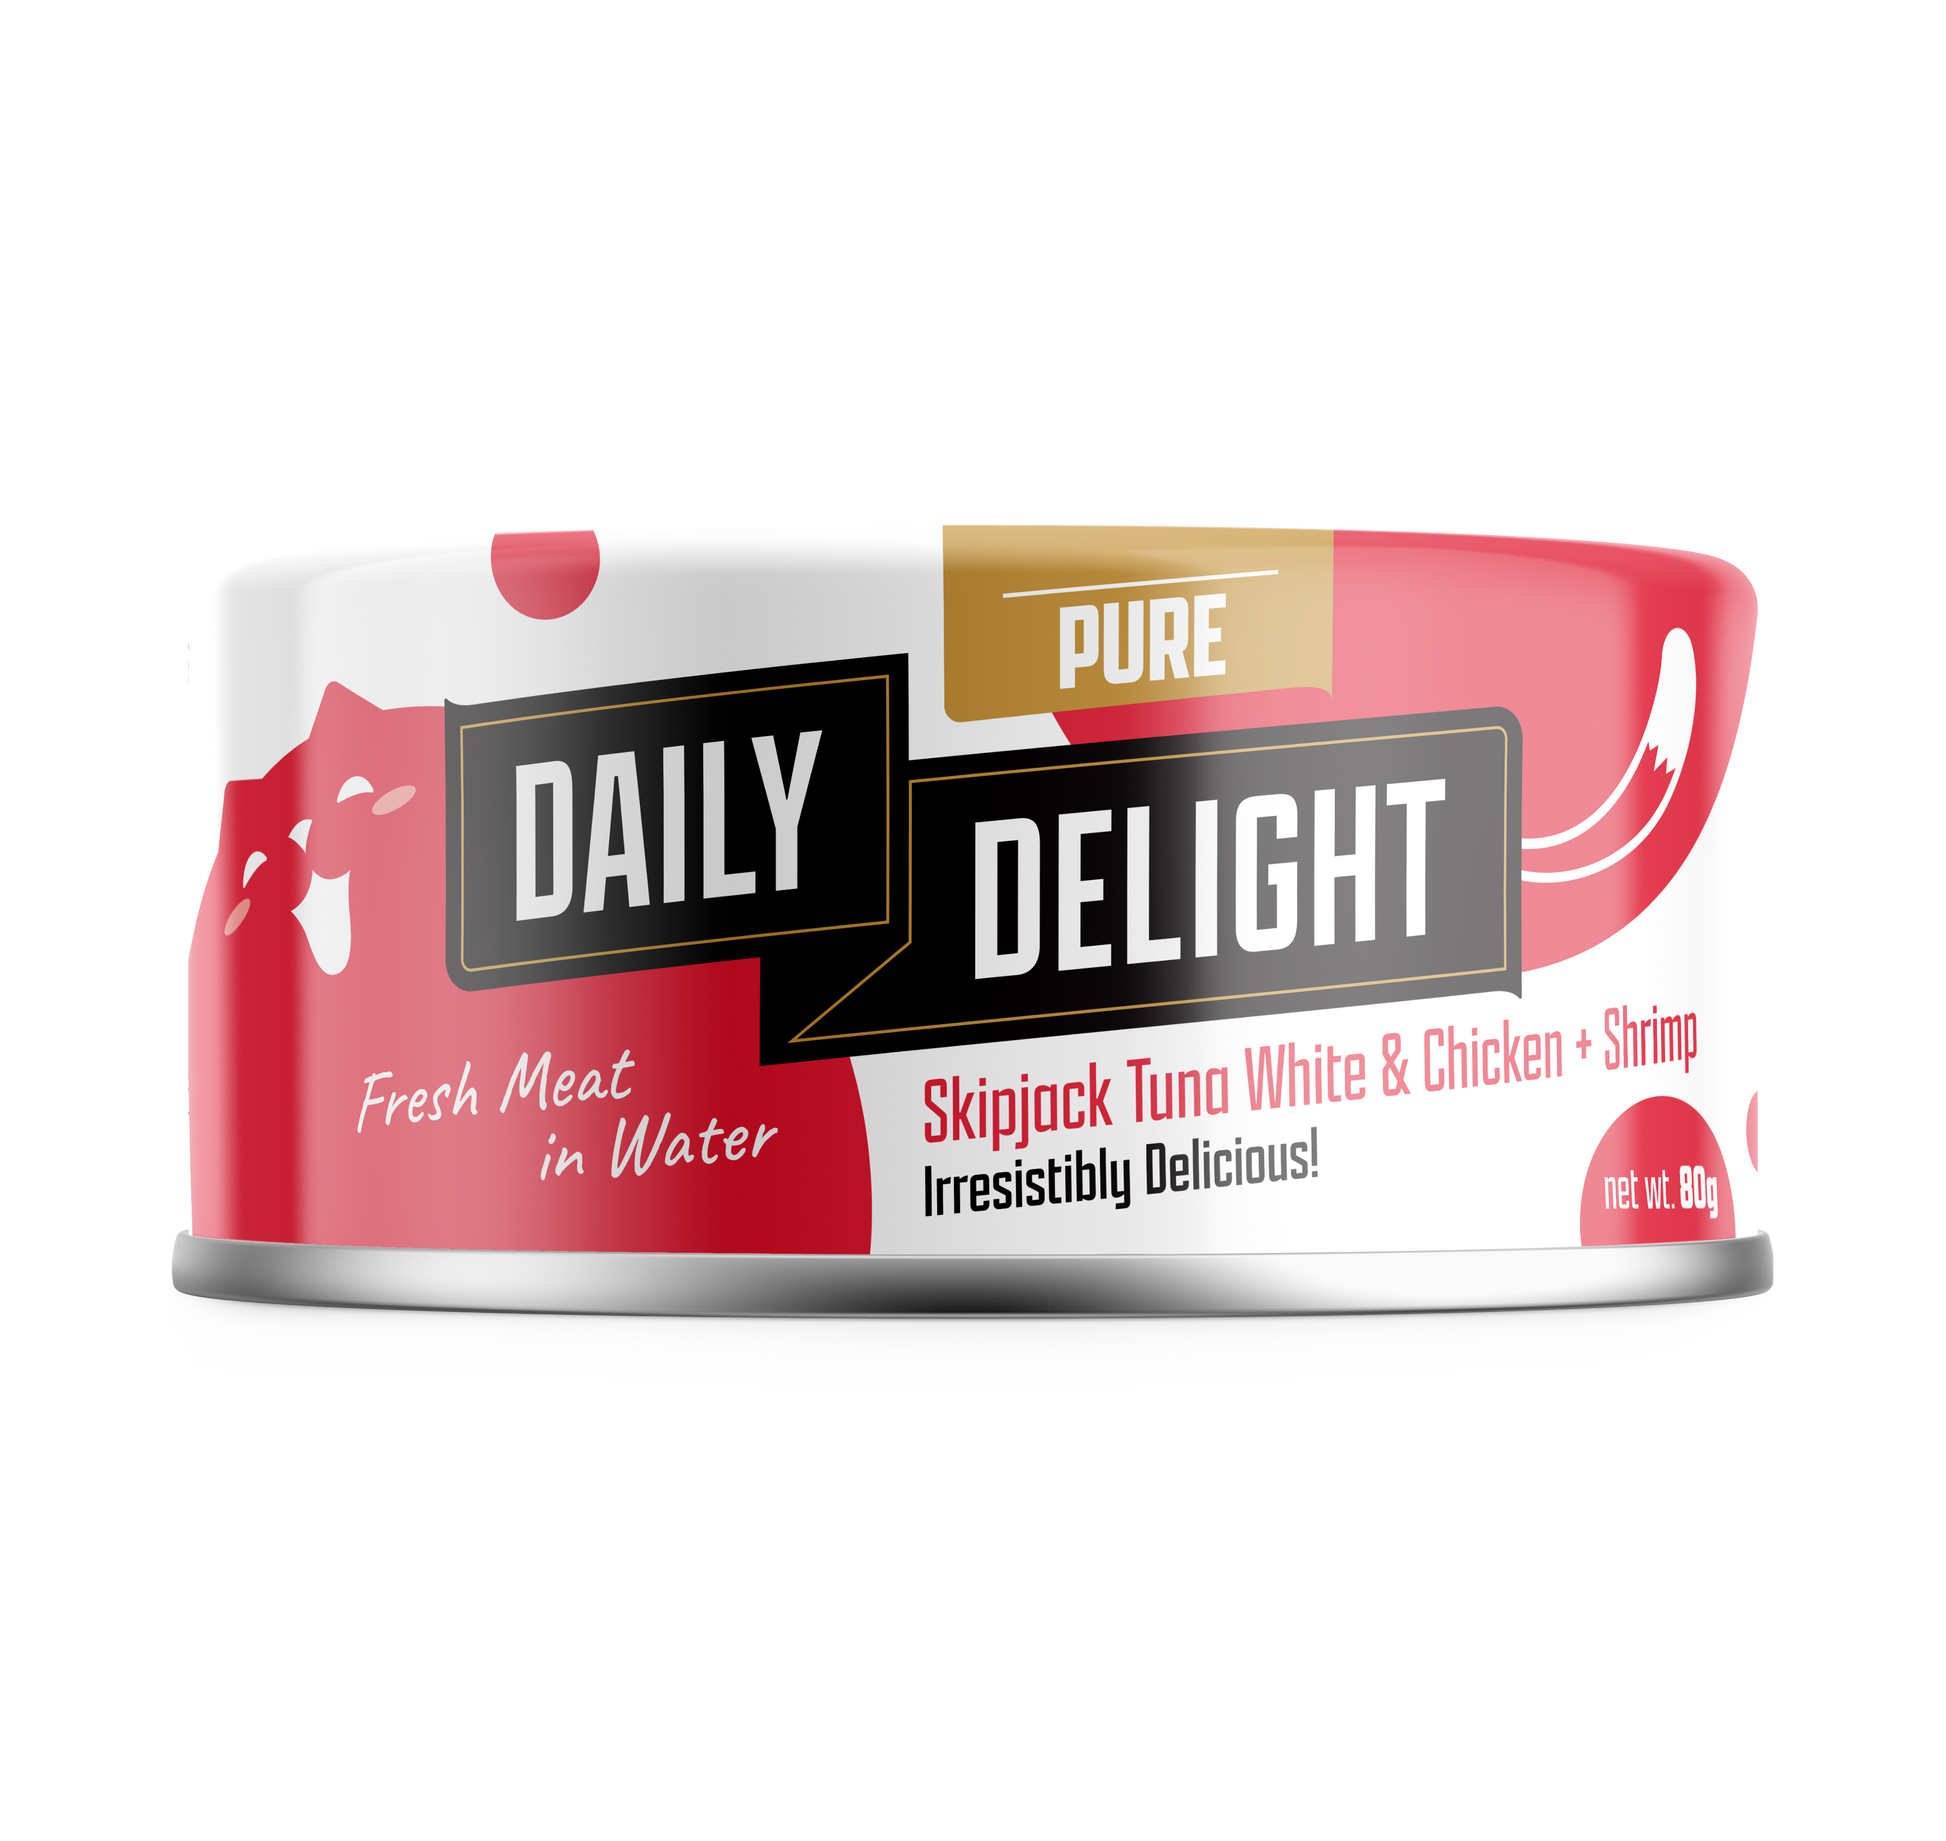 Daily Delight Pure Skipjack Tuna White & Chicken with Shrimp 80g-Daily Delight-Catsmart-express